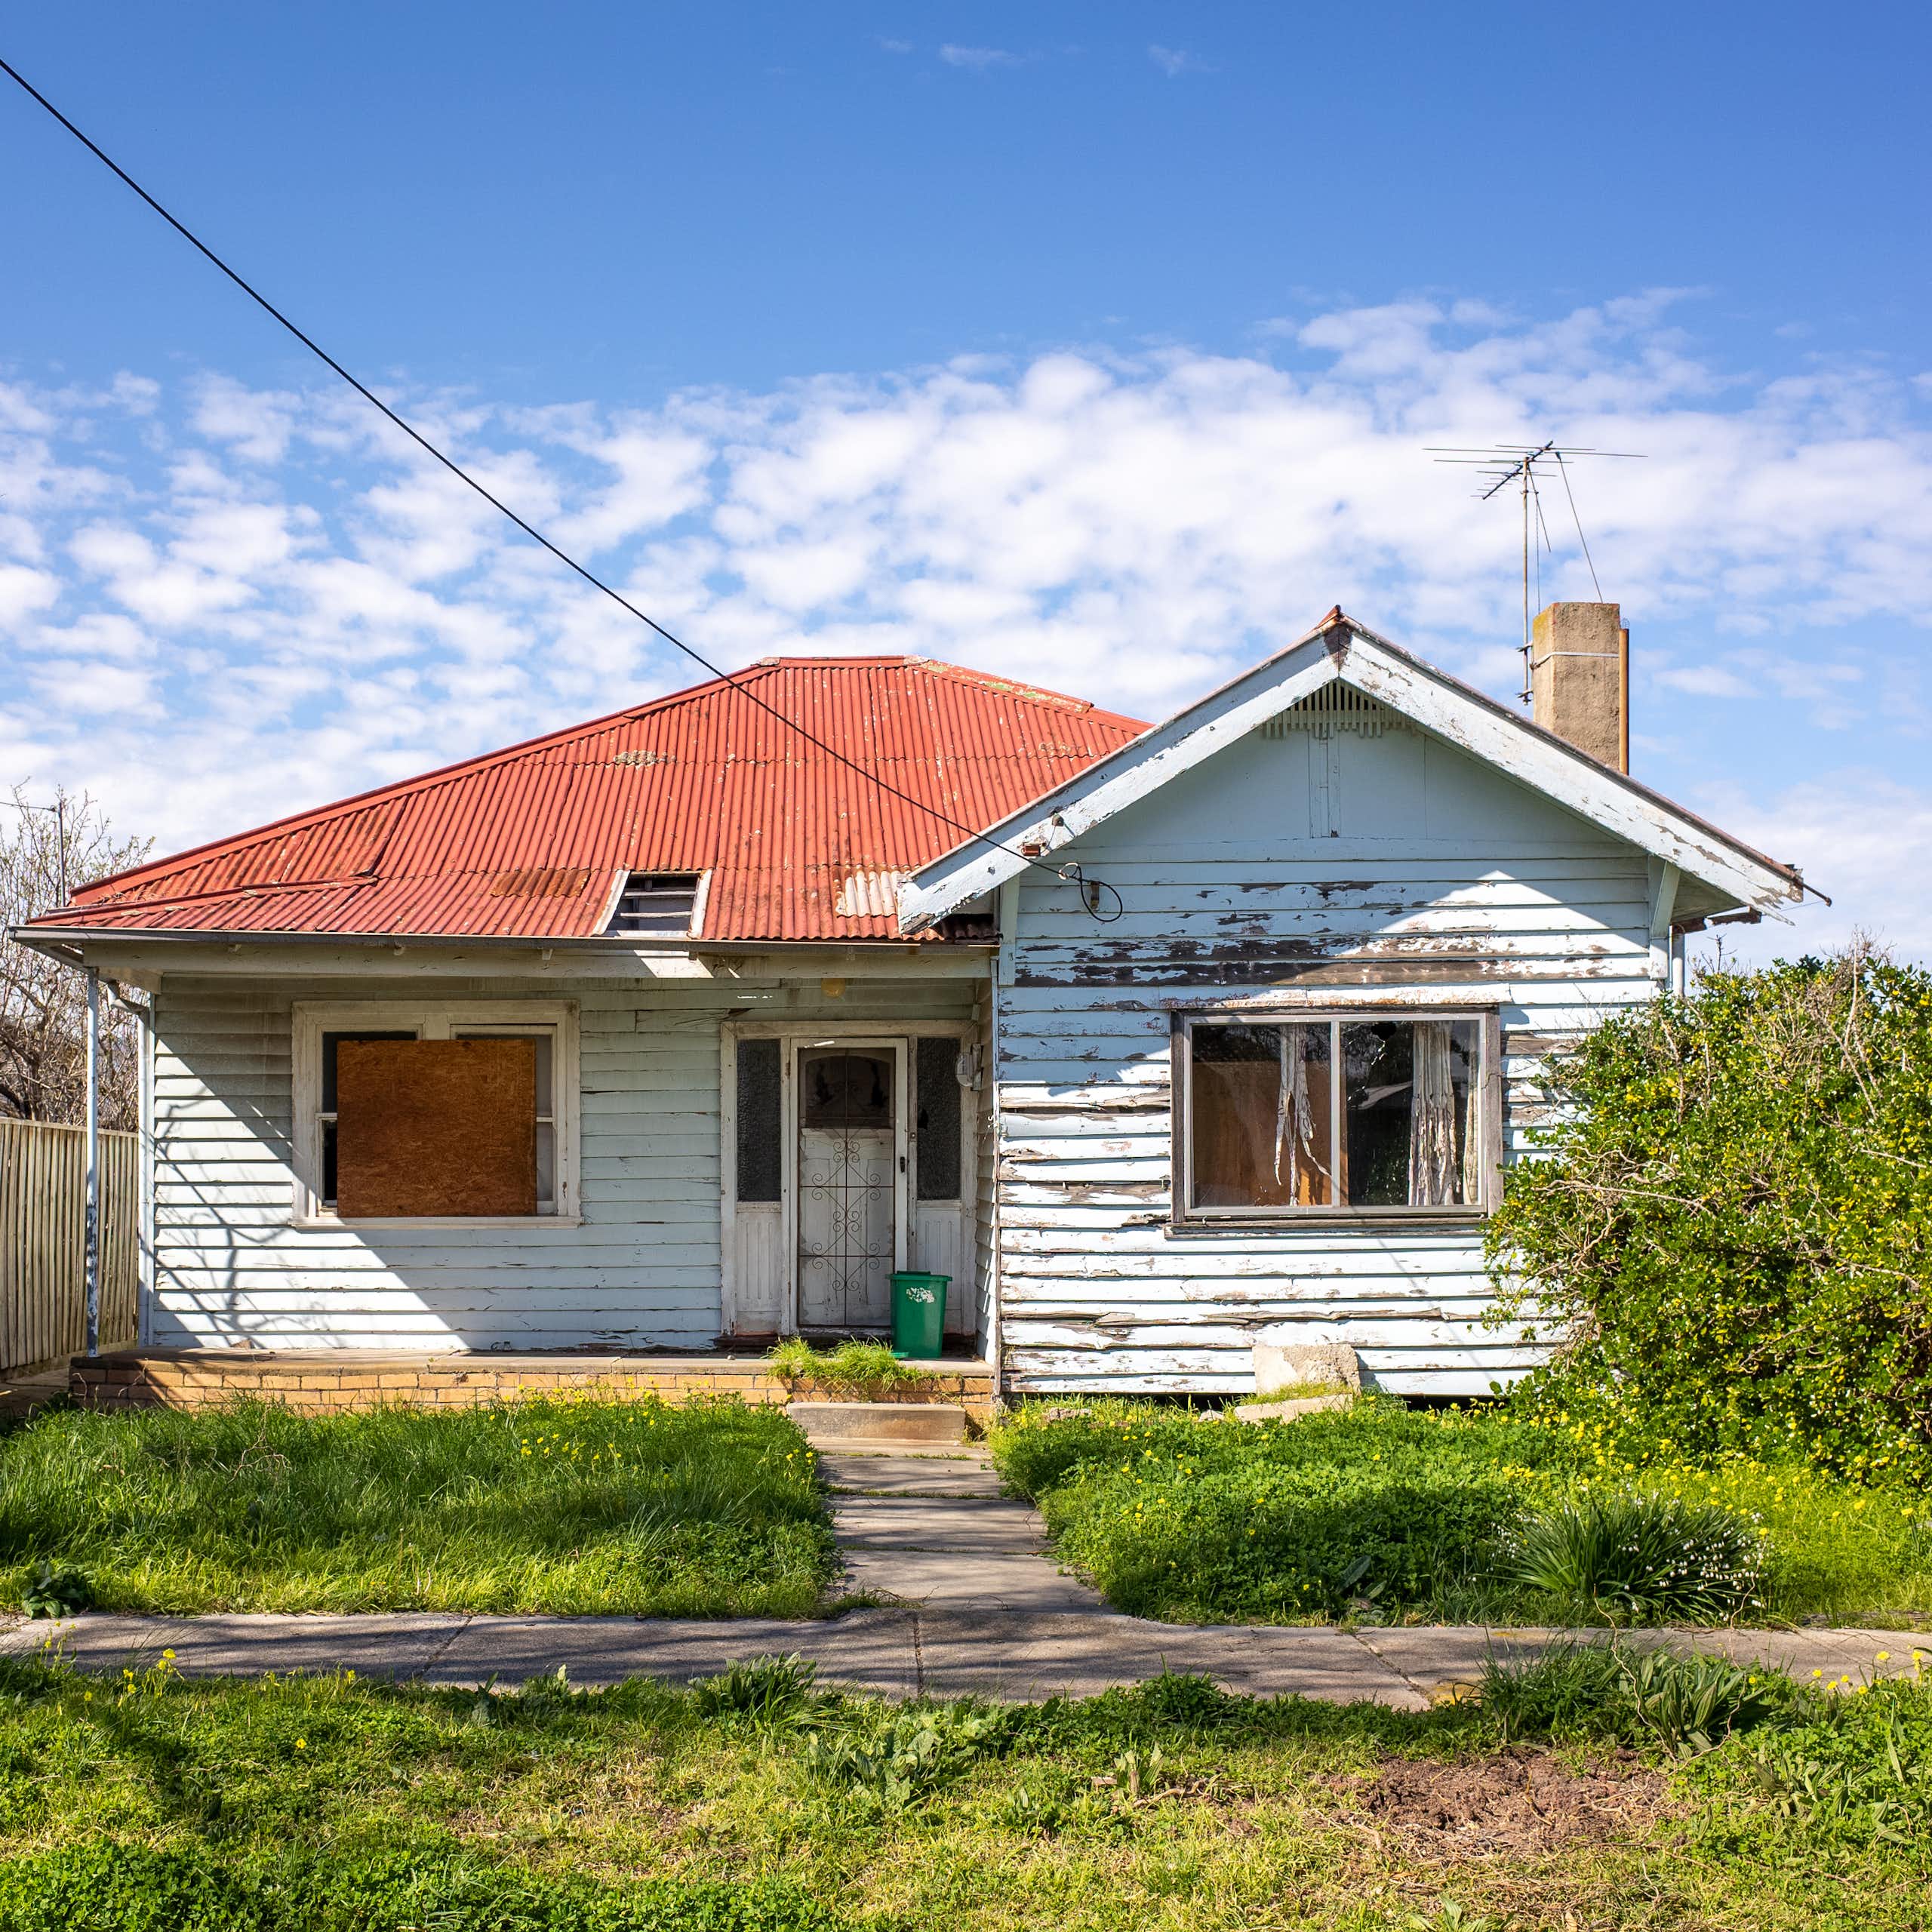 The exterior of a weatherboard house with an overgrown lawn